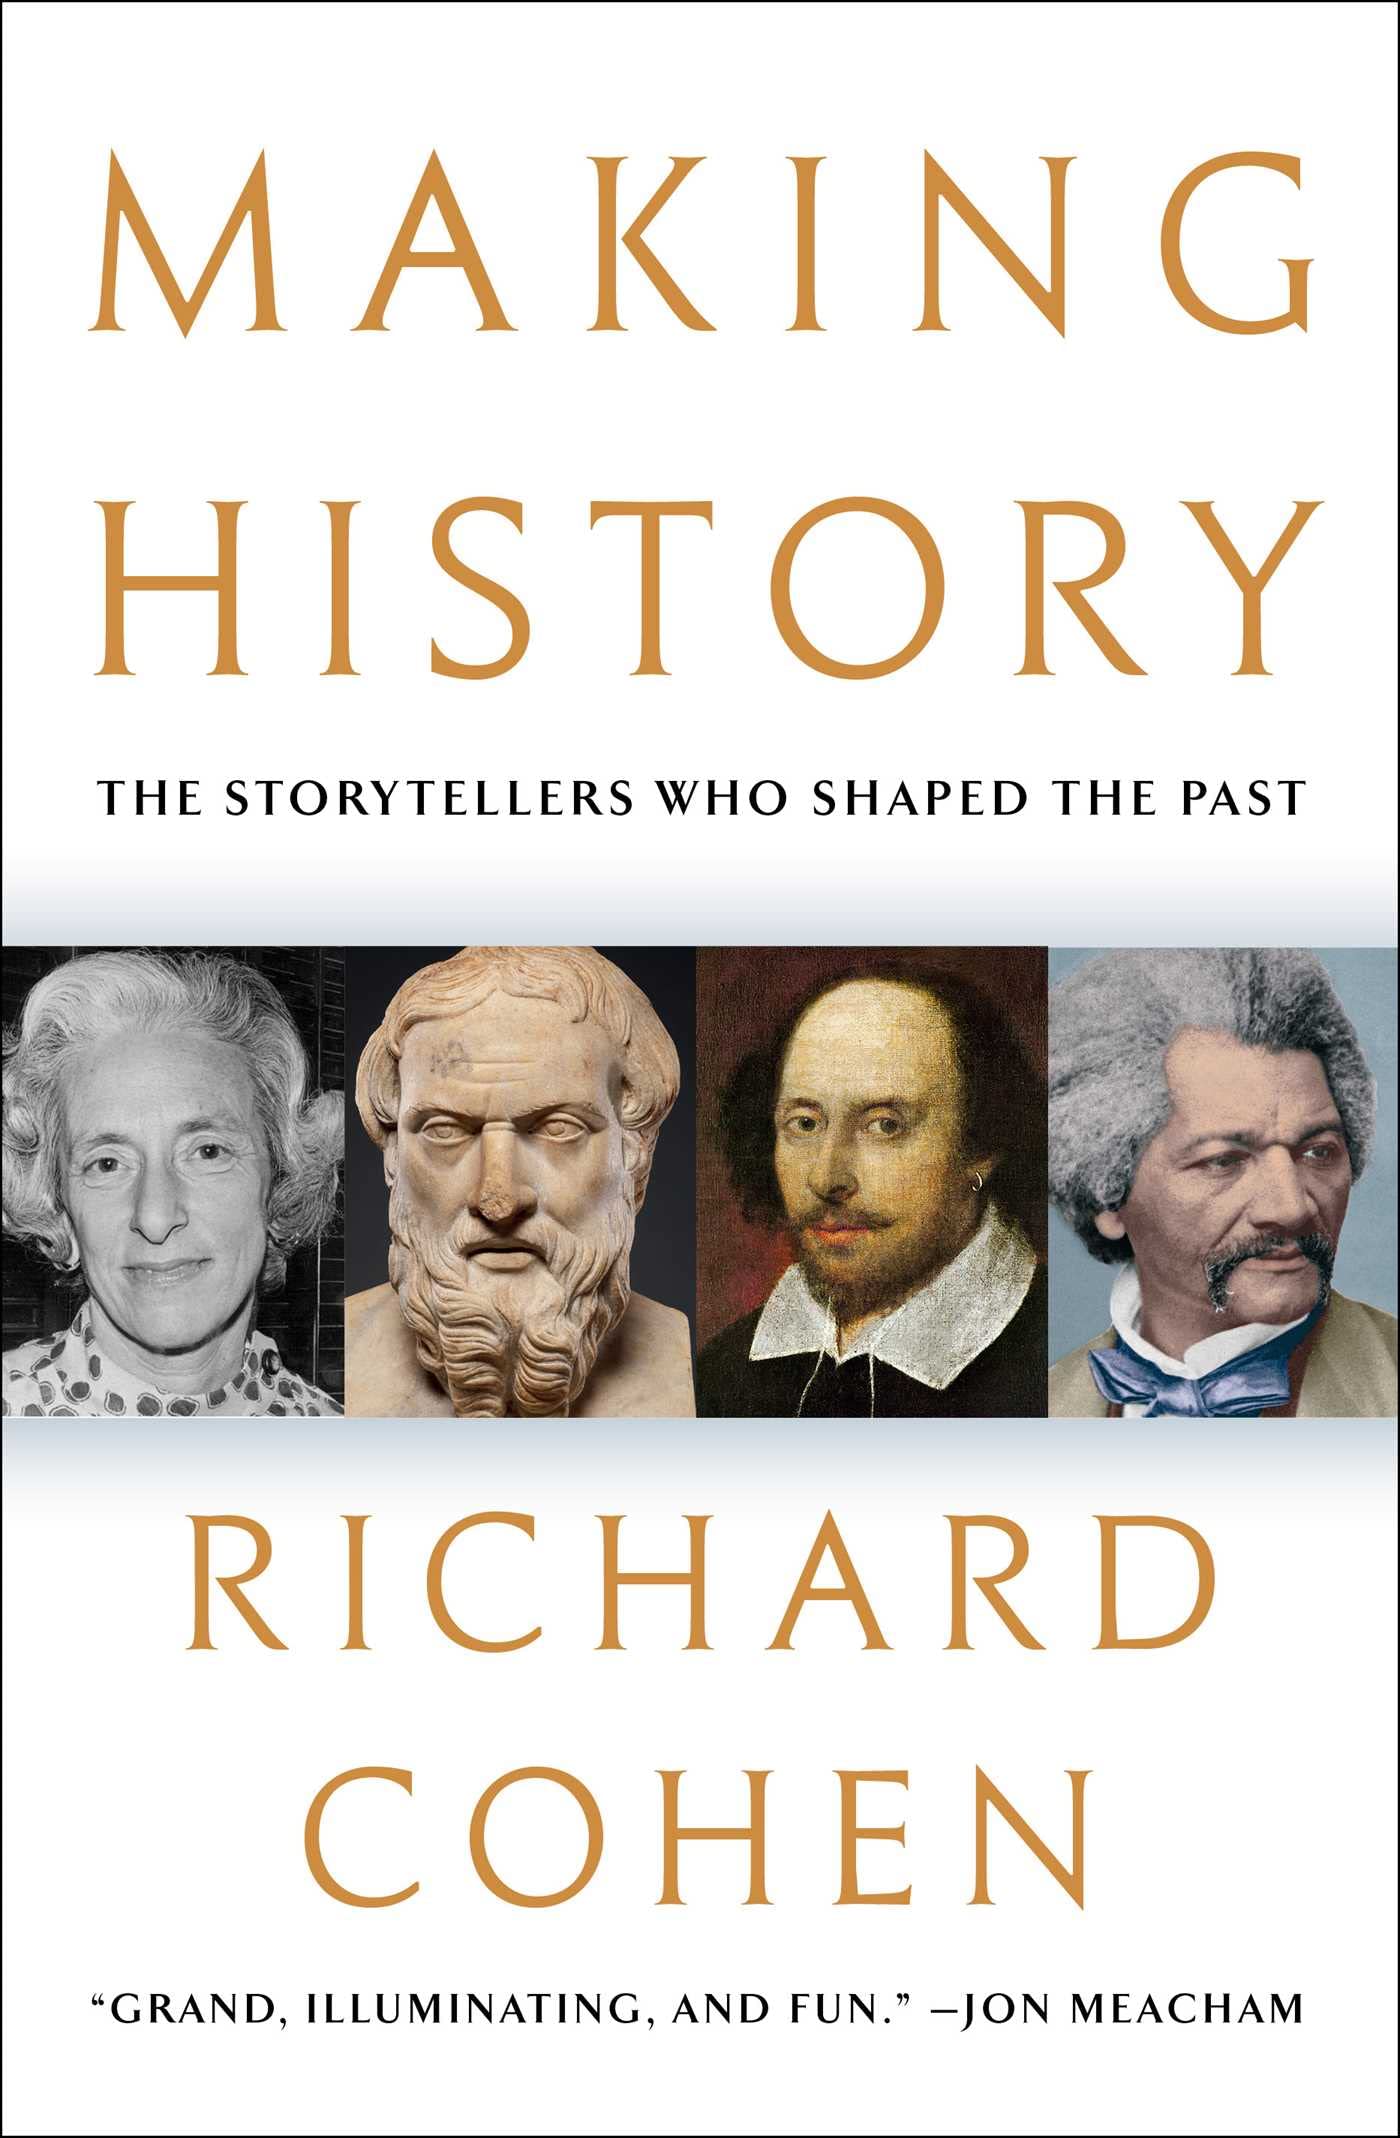 MAKING HISTORY by Richard Cohen